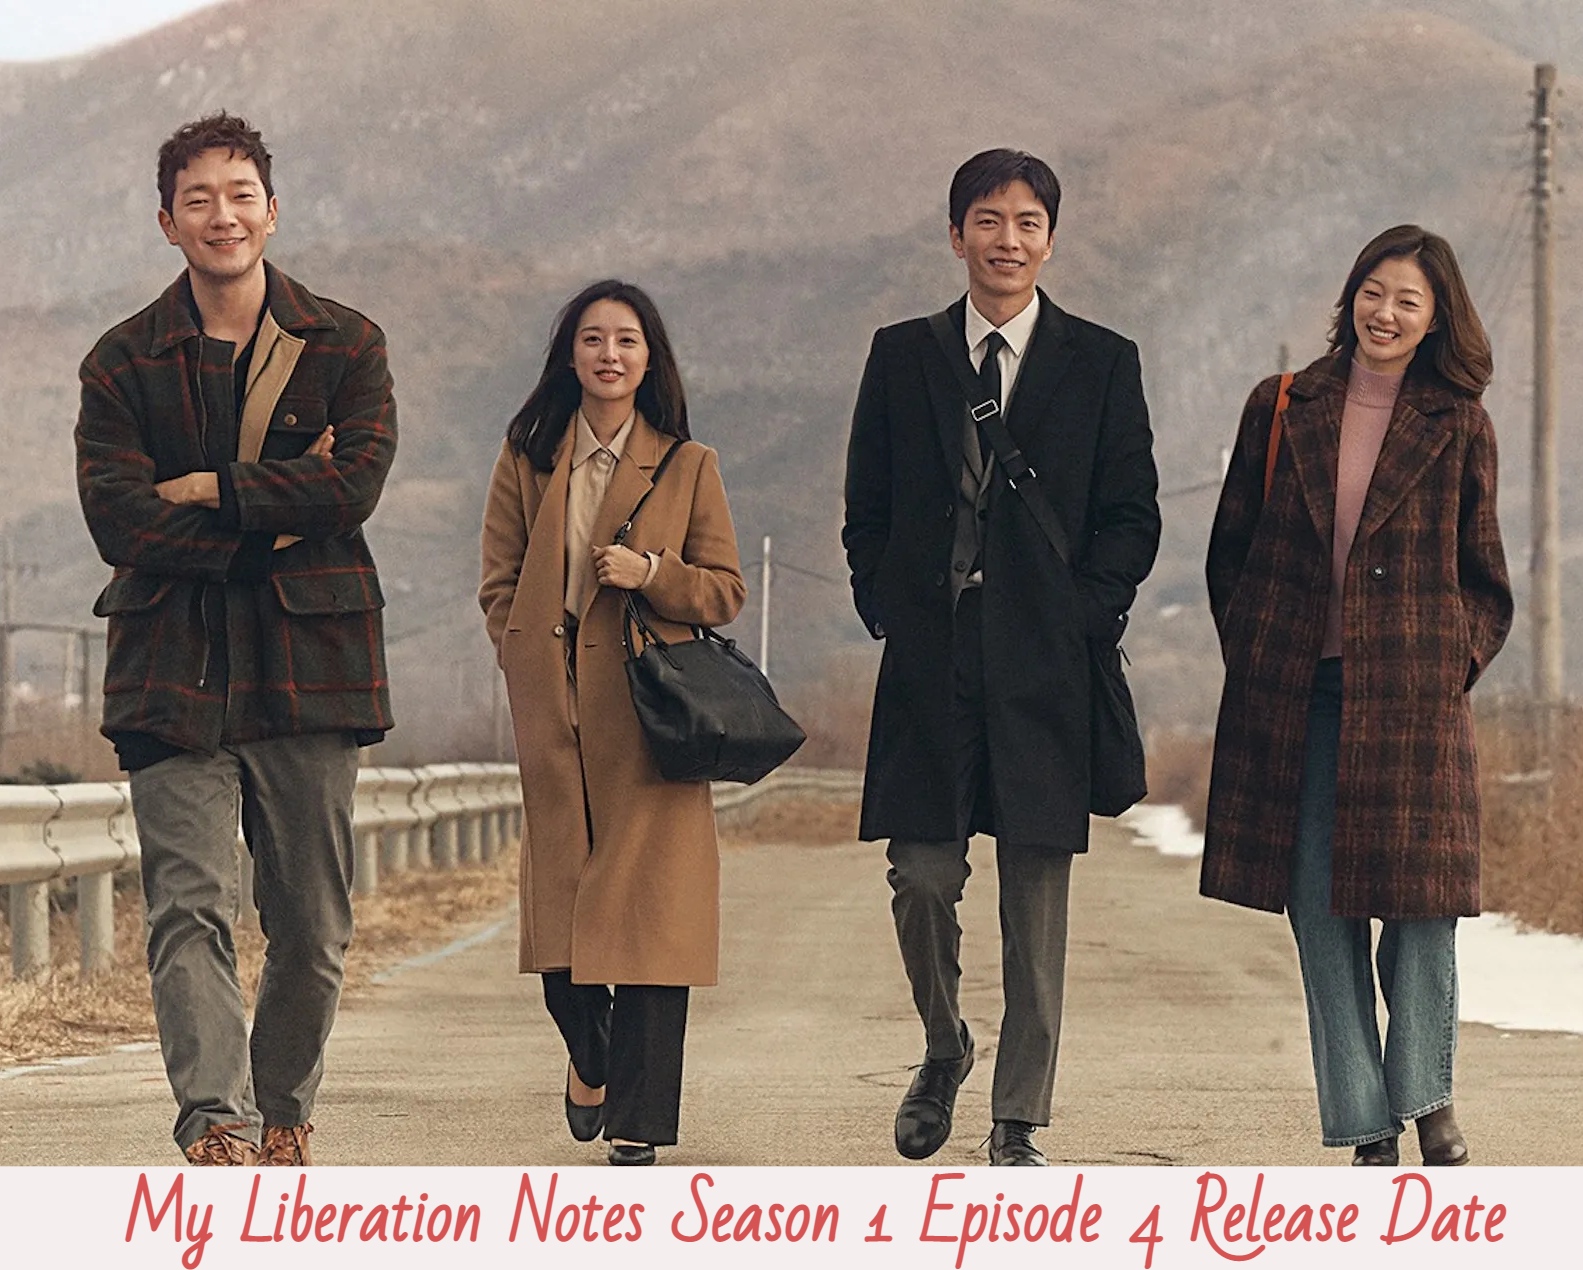 My Liberation Notes Season 1 Episode 4 Release Date